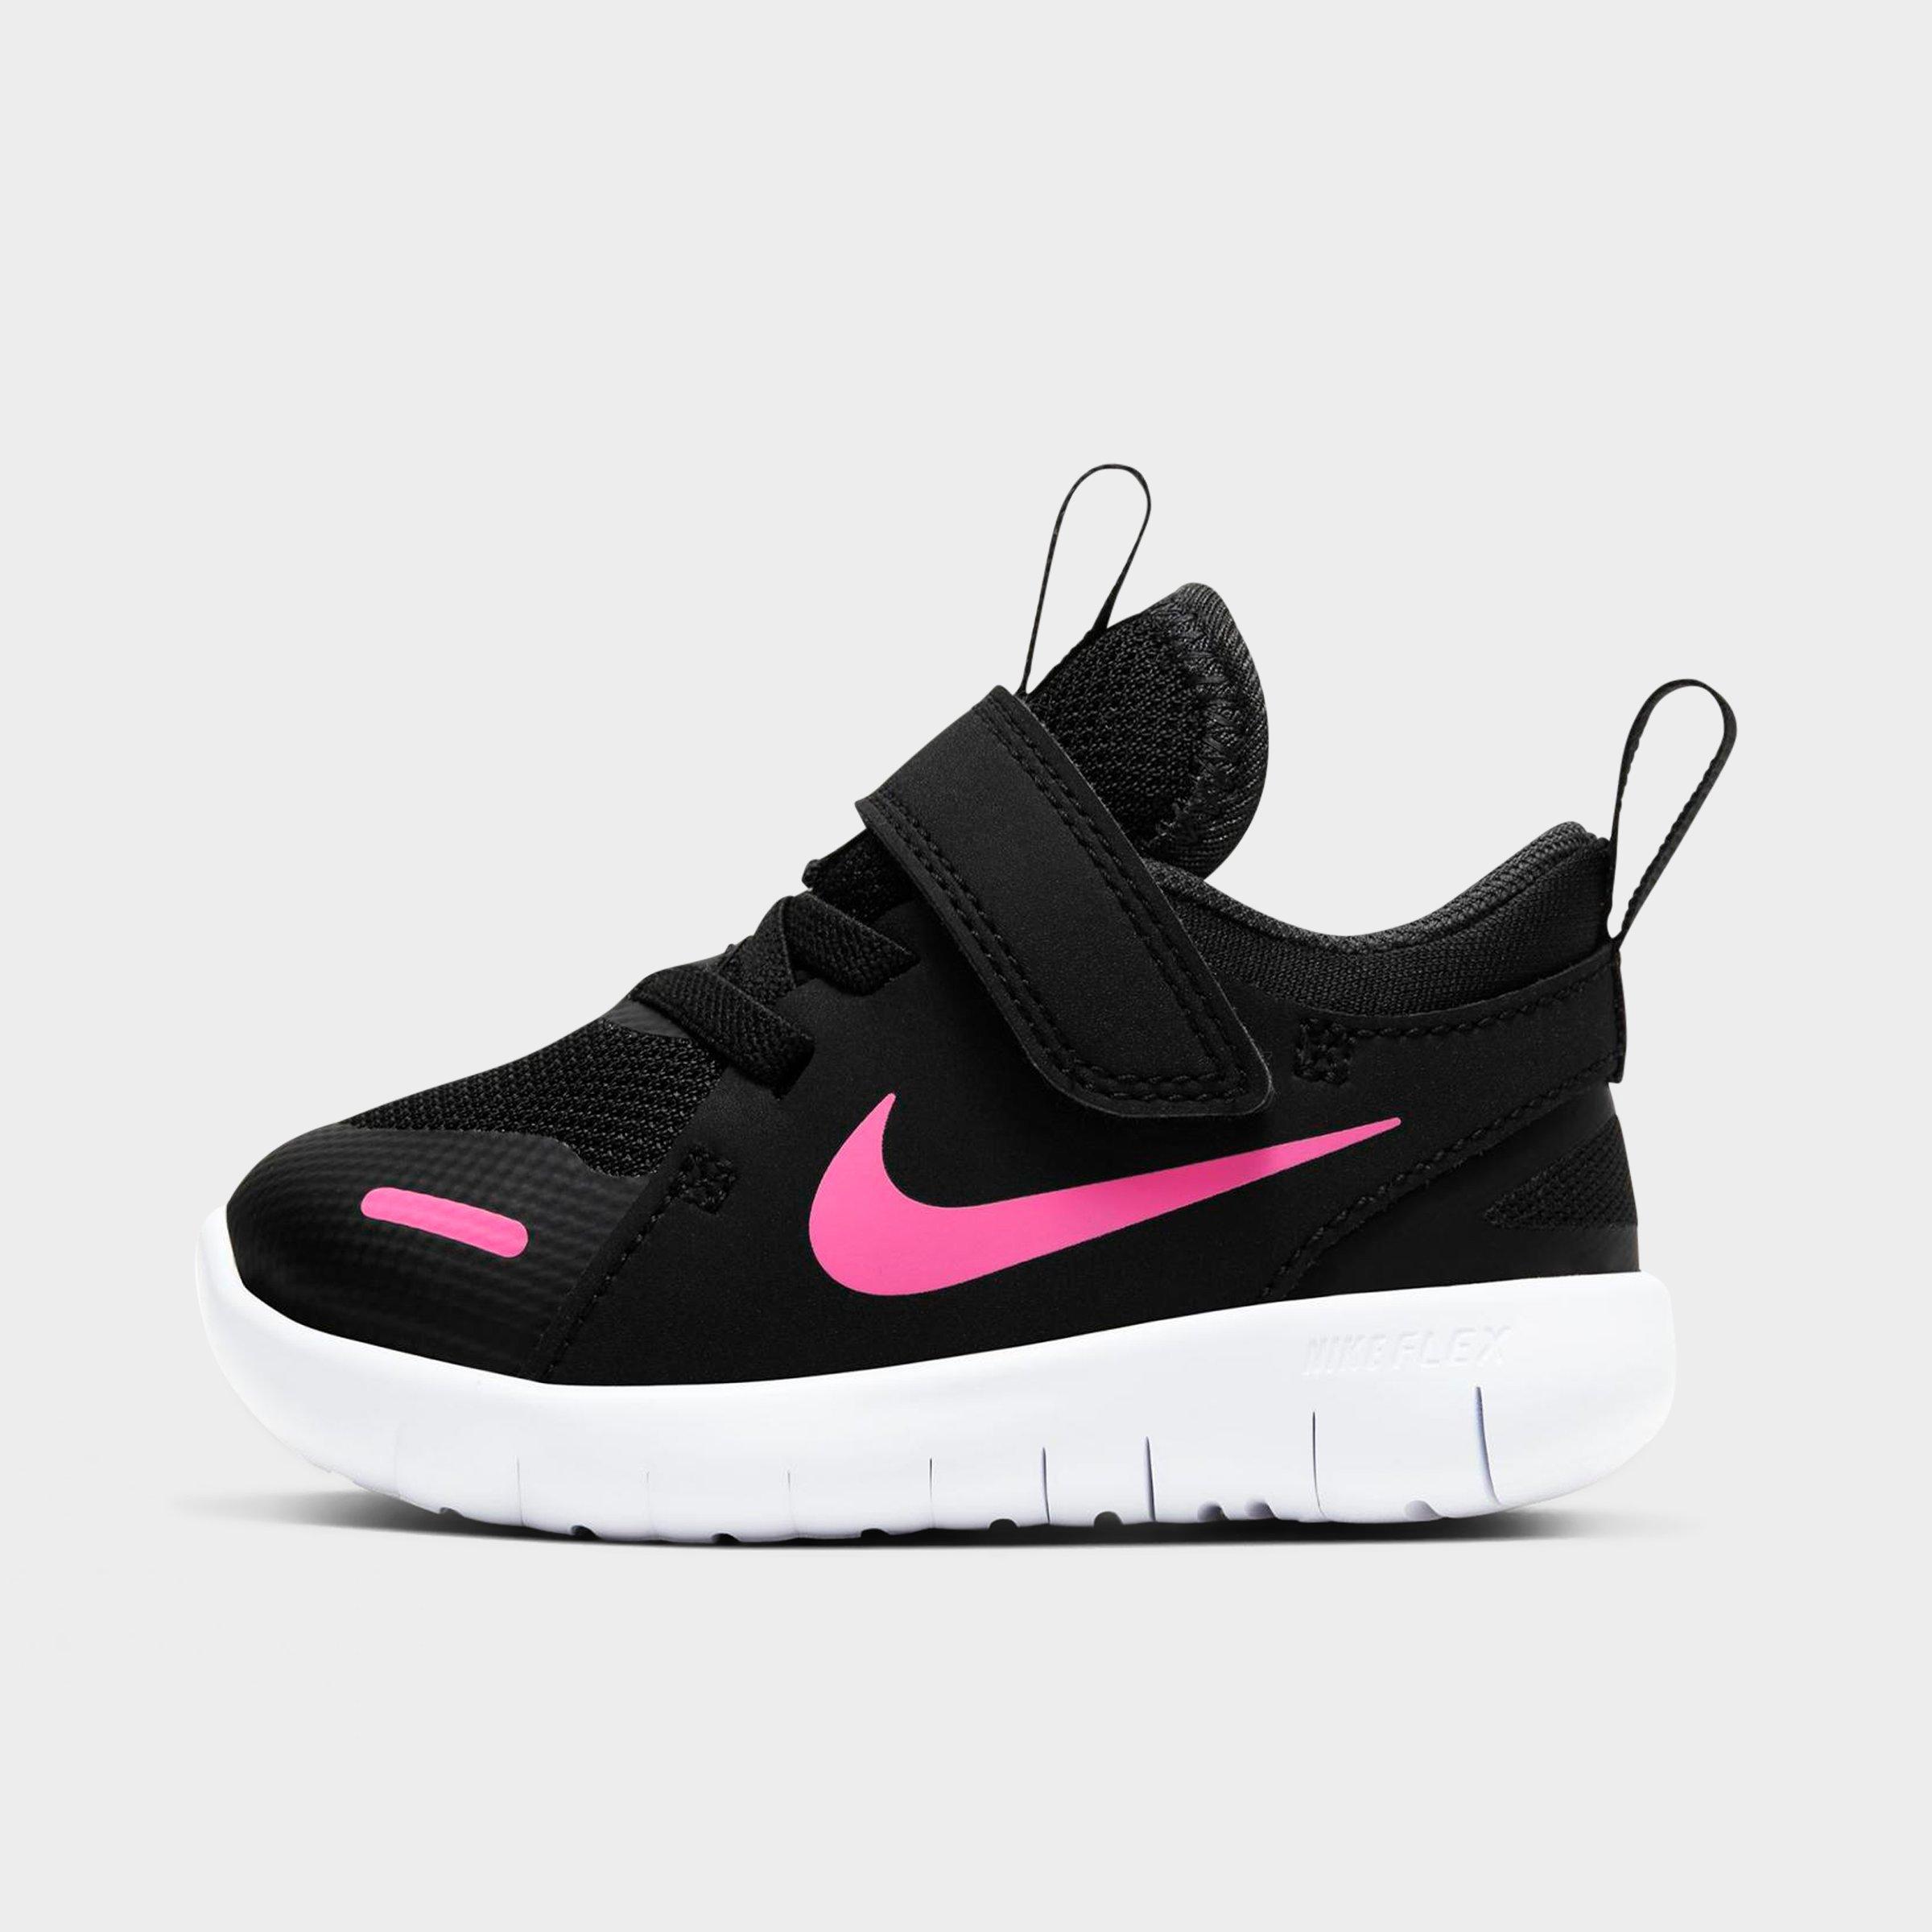 nike flex contact women's running shoes black white anthracite